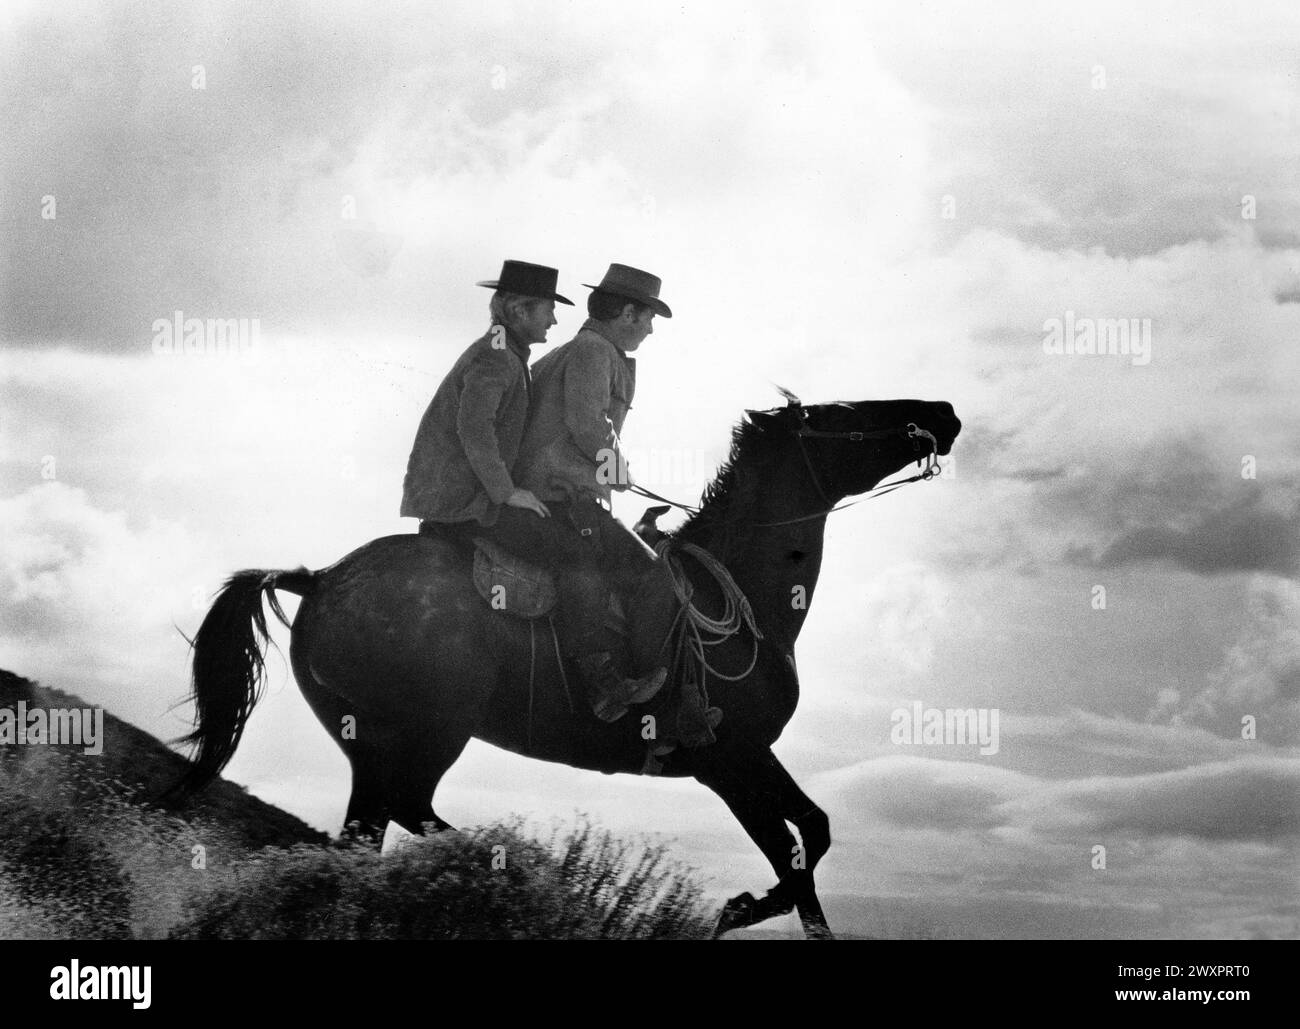 Two cowboys on horseback, on-set of the film, 'Butch Cassidy And The Sundance Kid', 20th Century-Fox, 1969 Stock Photo